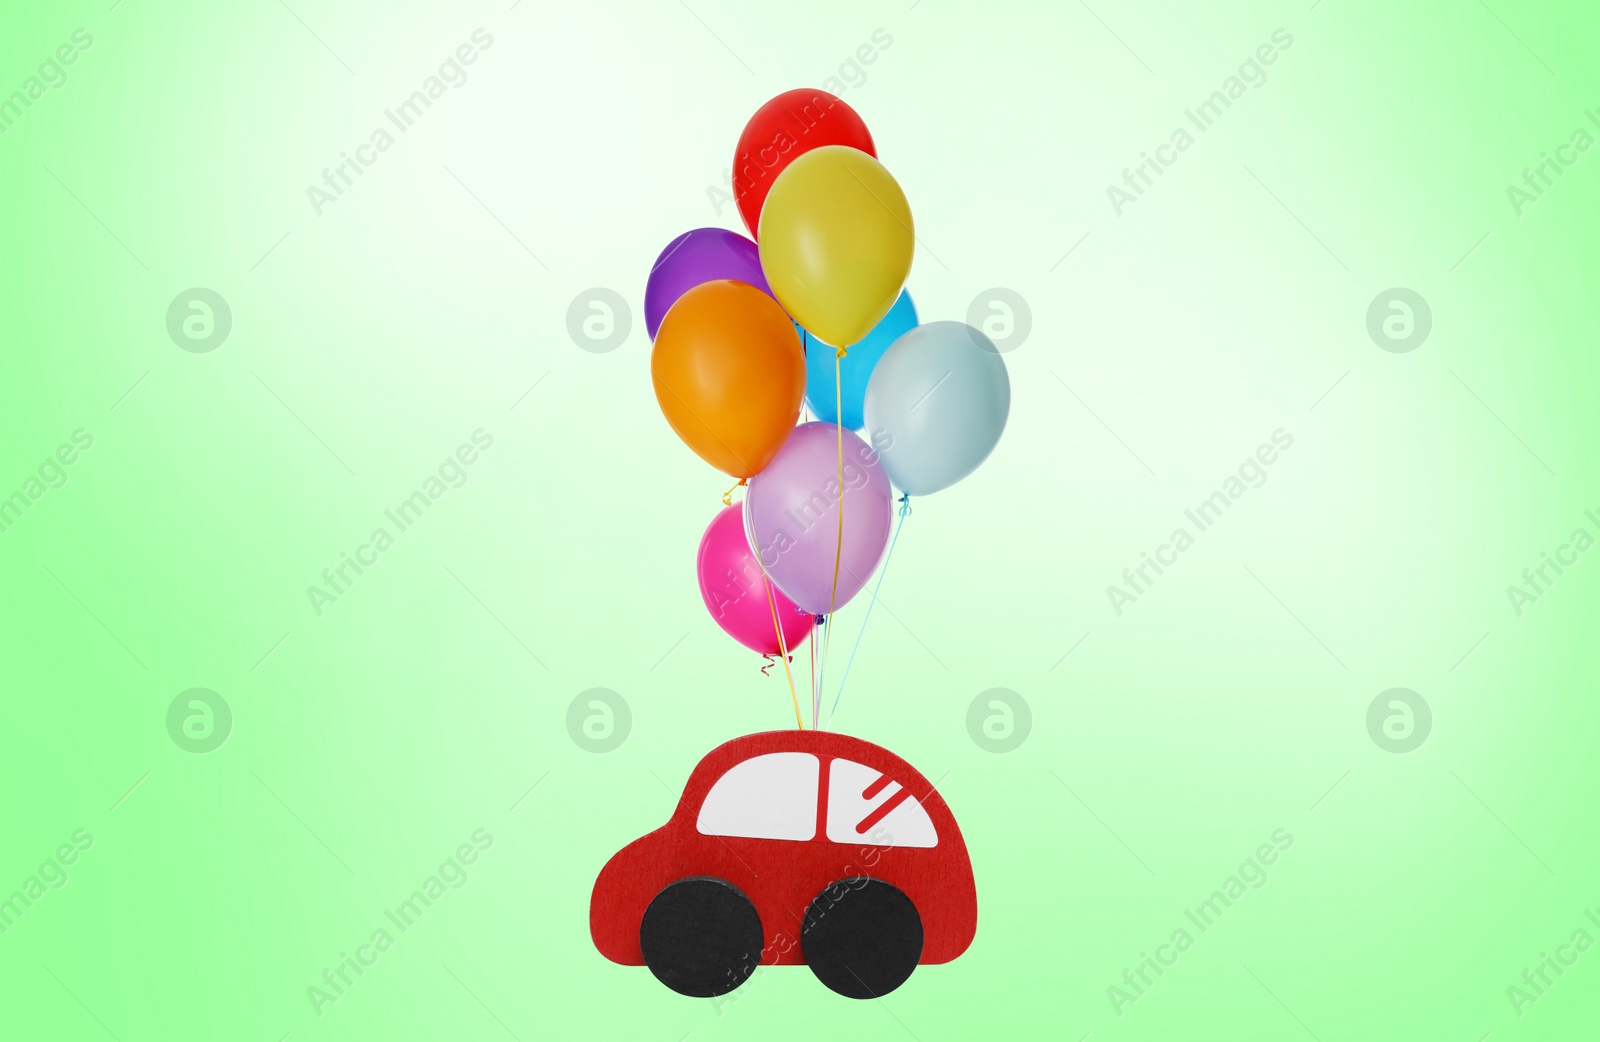 Image of Many balloons tied to toy car flying on light green background